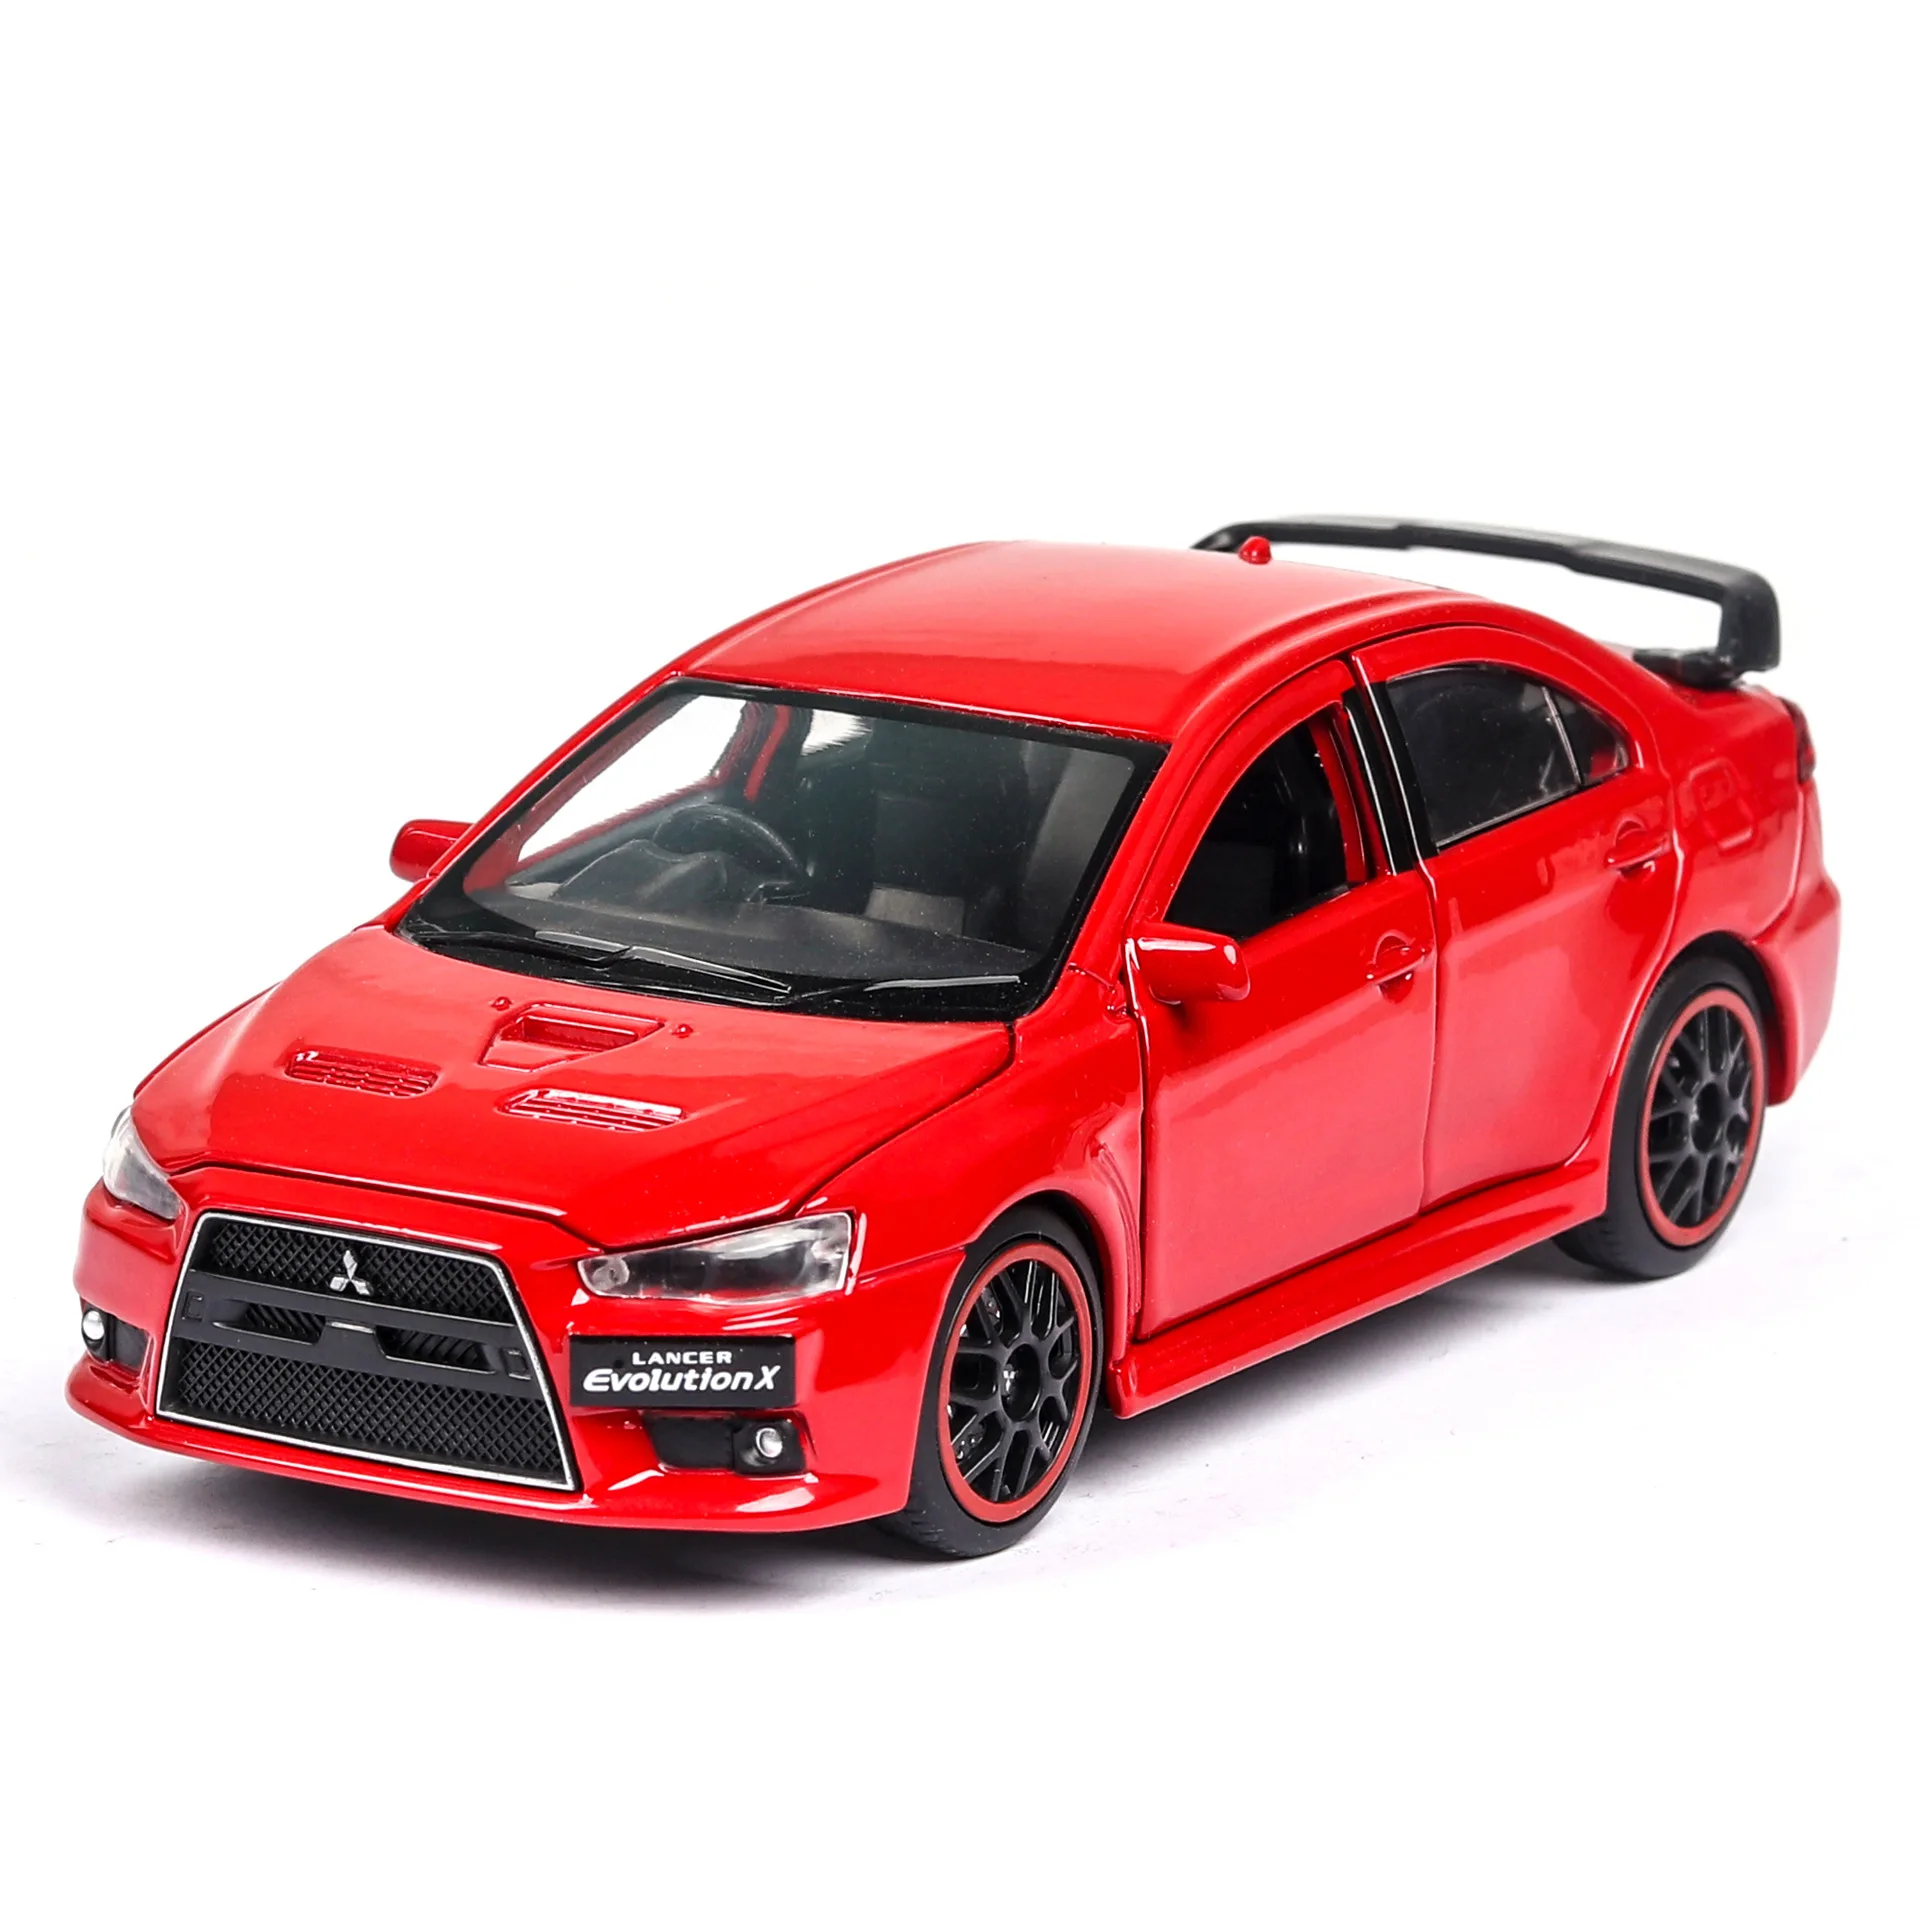 1:32 Diecast Toy Car Model Red Metal Sports Car Pull Back Car Open Door With Sound And Light Flash Collection Decoration Gift model car sound light toy car1 32 new honda civic type r mugen rr alloy car model decoration pull back toy car for boy gifts